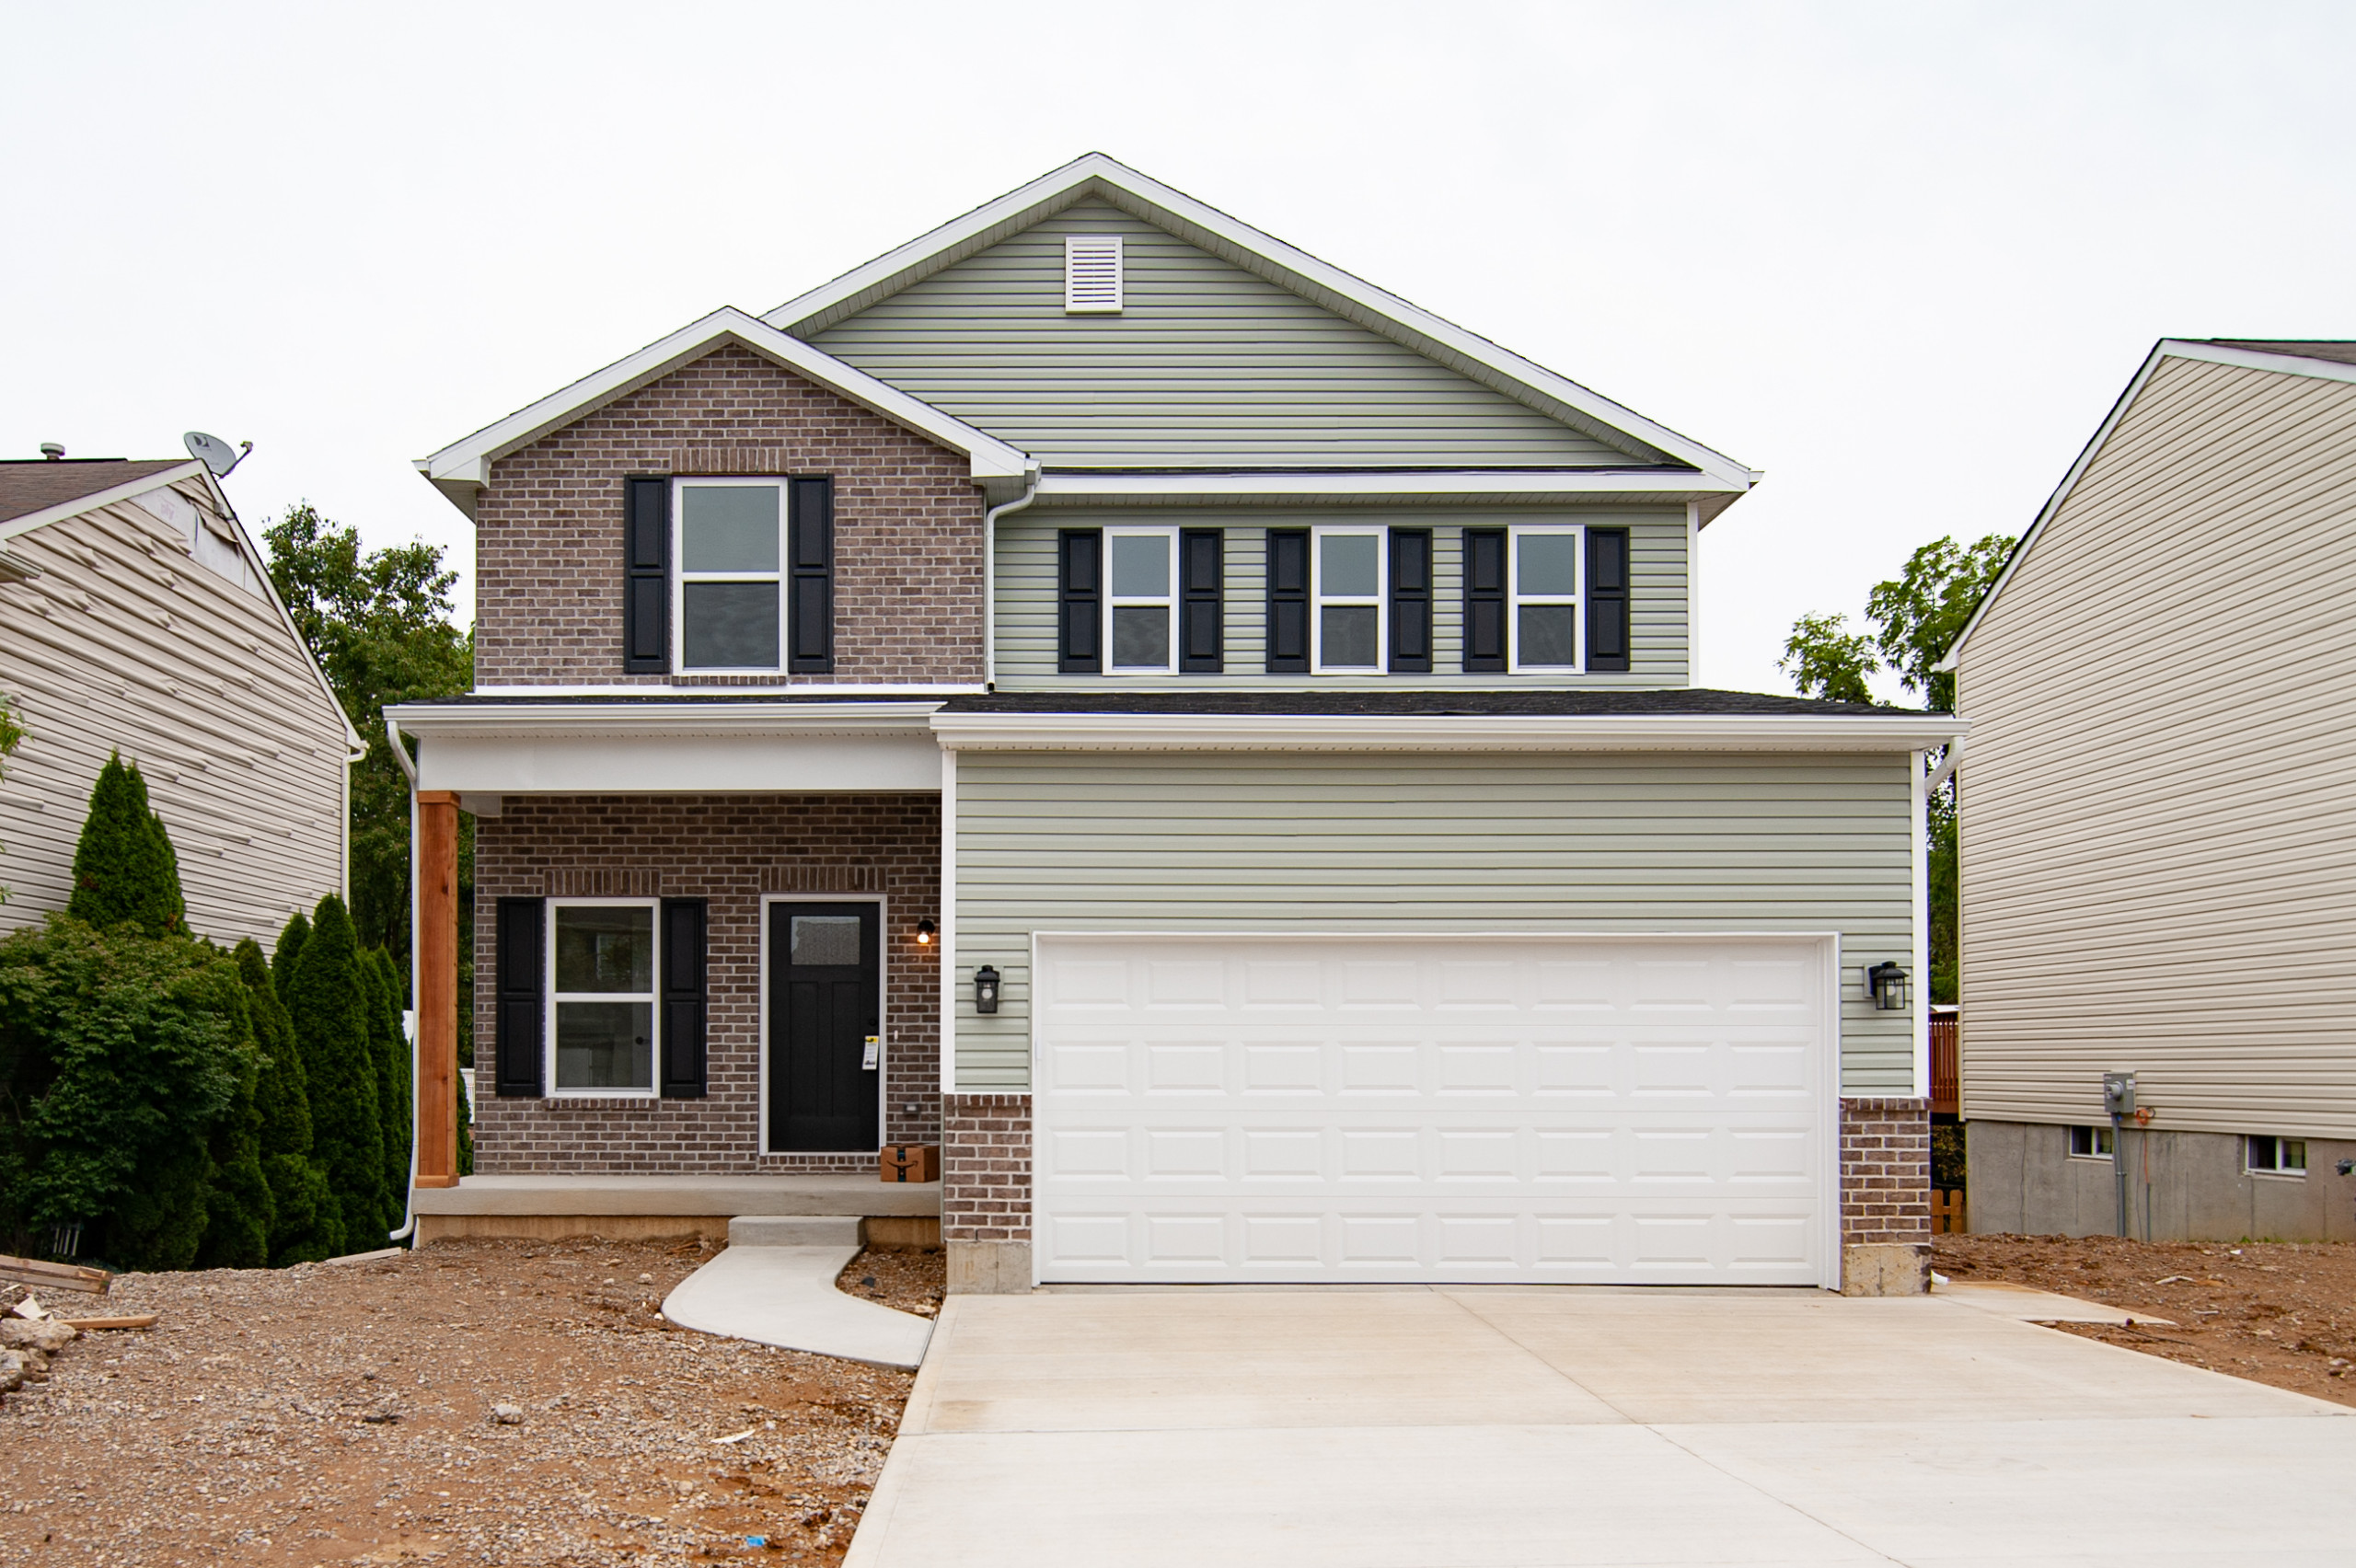 New 2 story home in Morrow